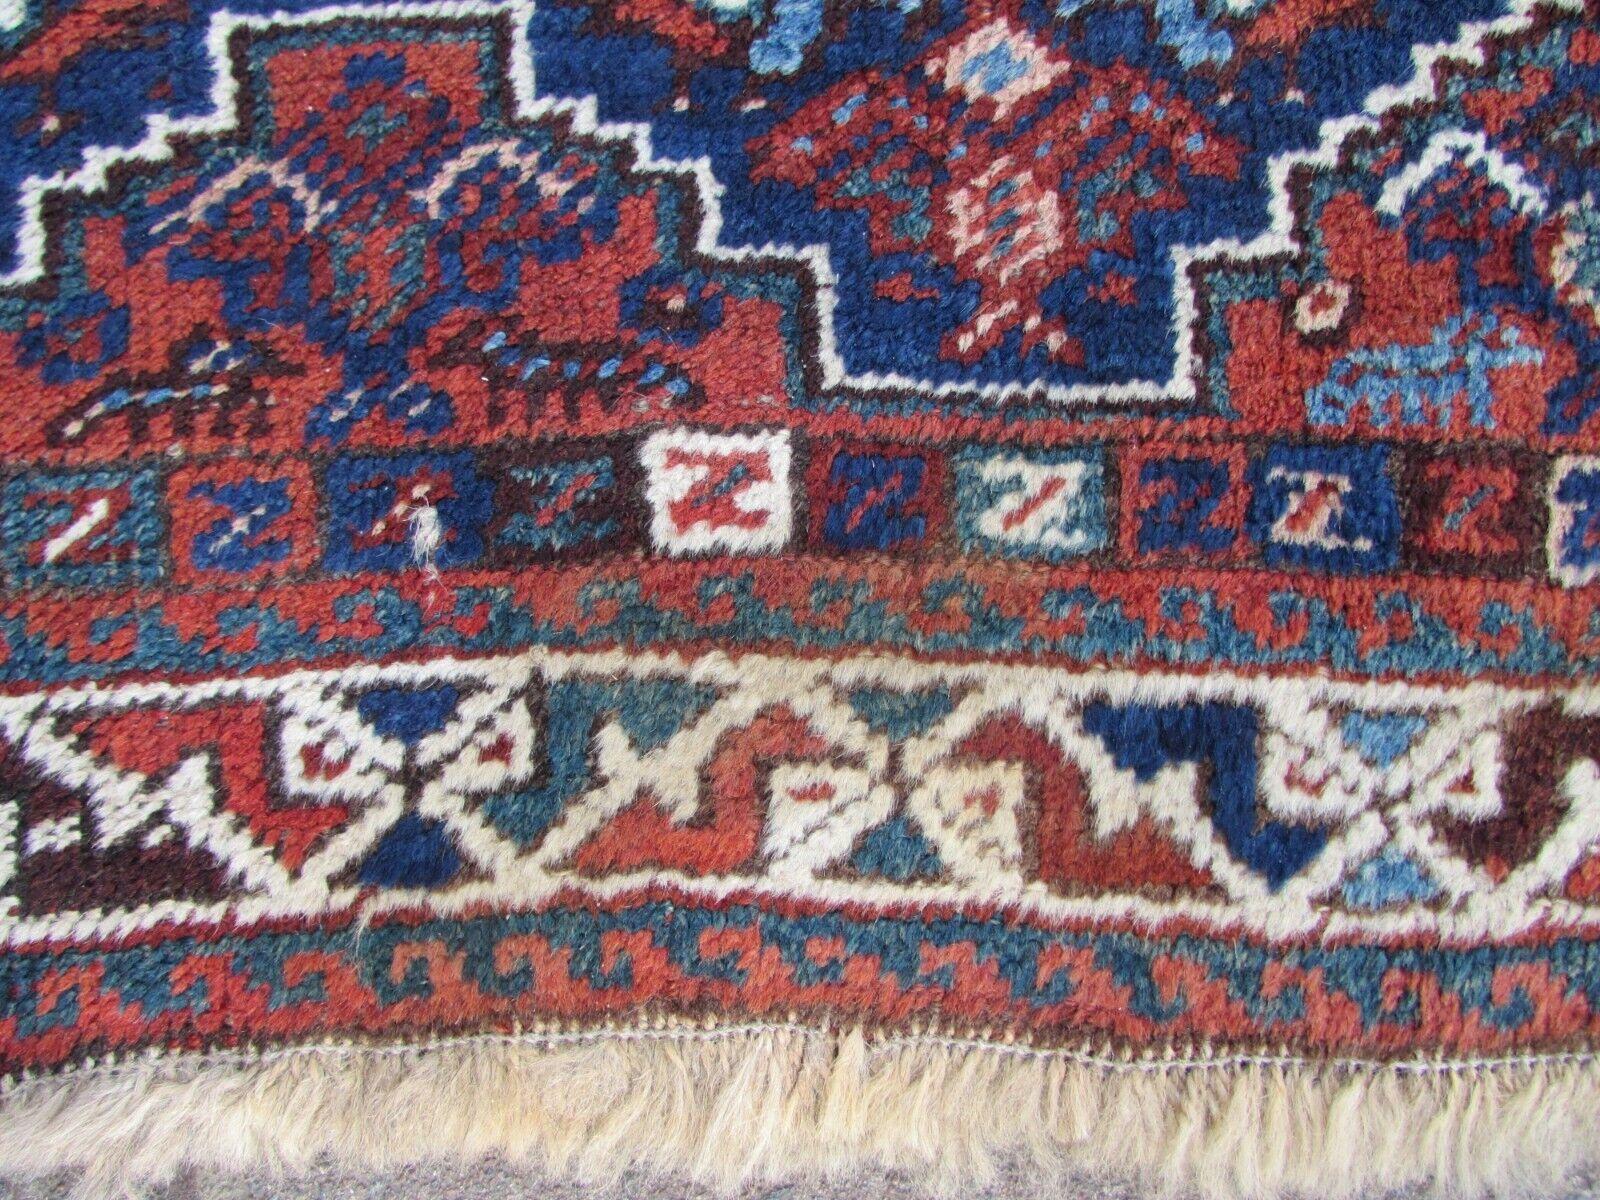 Elevate your home with the timeless charm of this Handmade Antique Persian Style Shiraz Rug. Dating back to the 1920s, this rug measures 3.9' x 4.9', making it a versatile and stylish addition to your decor.

Condition: This antique rug boasts a